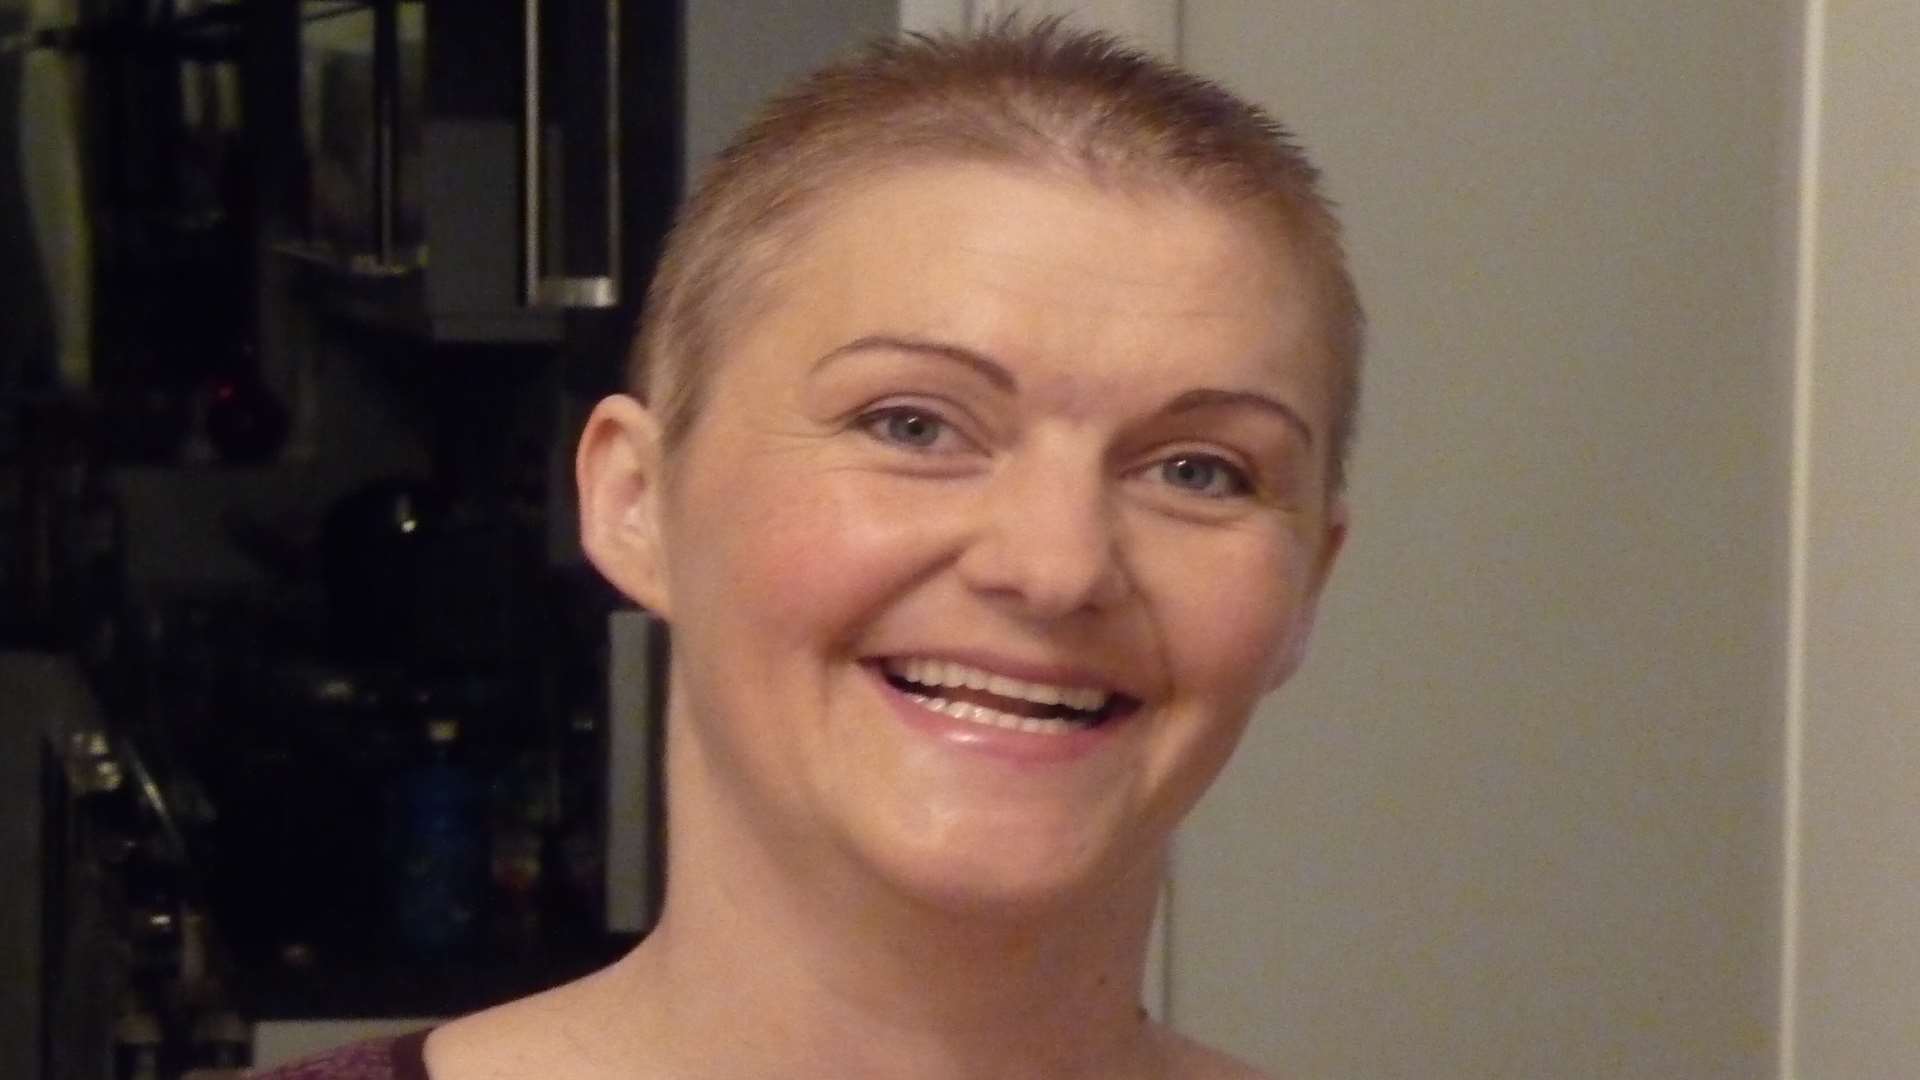 The mum-of-two lost her hair after undergoing treatment for breast cancer in 2013.